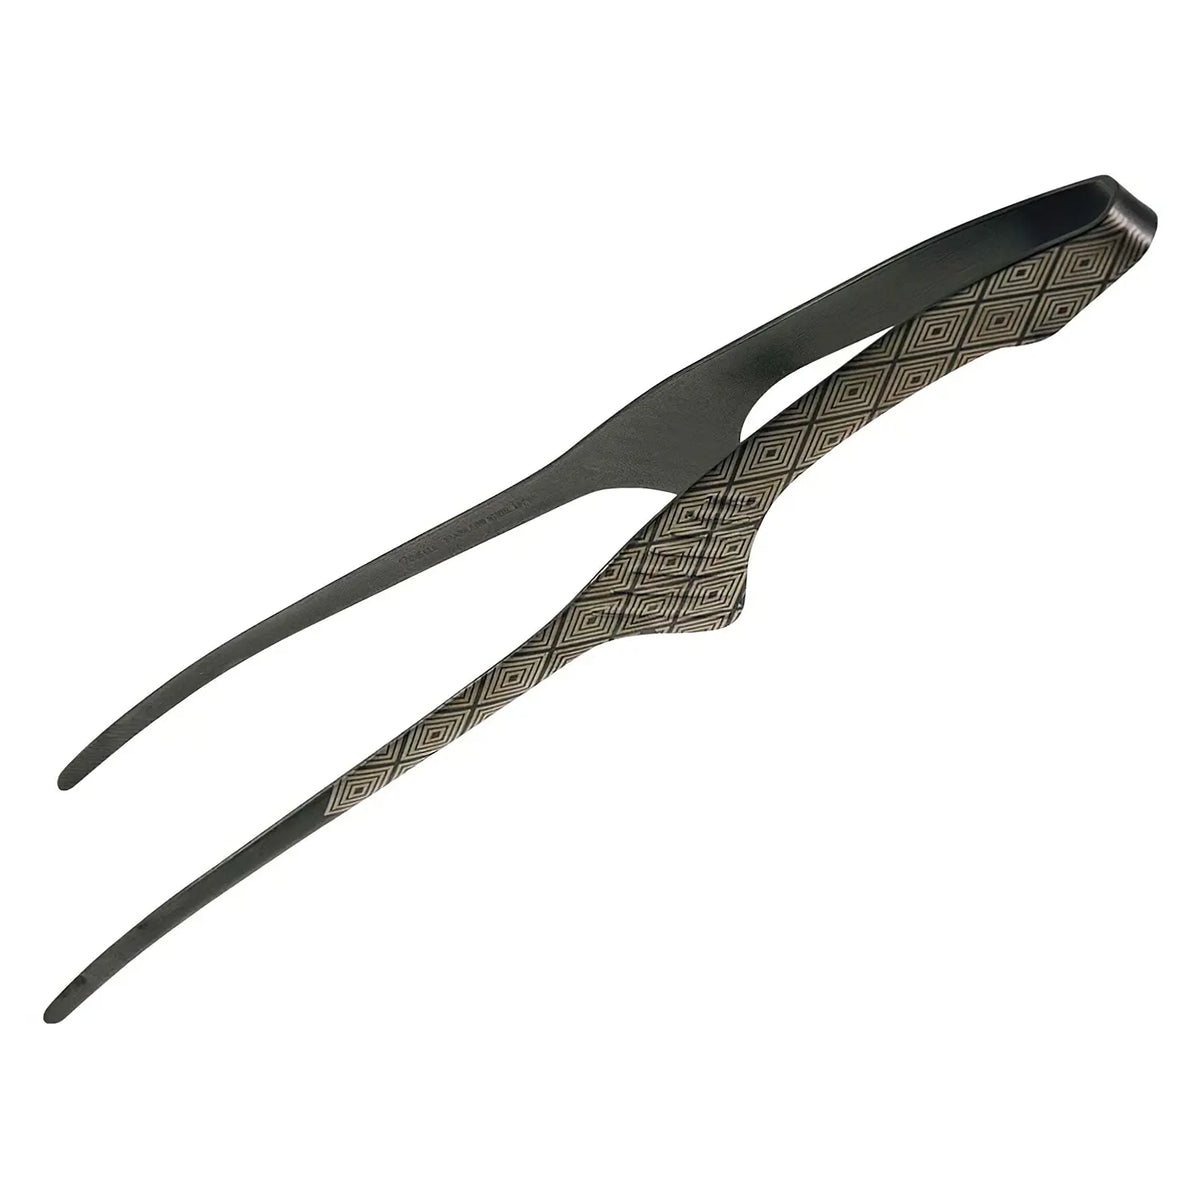 EBM Stainless Steel Clever Chopstick Tongs Black